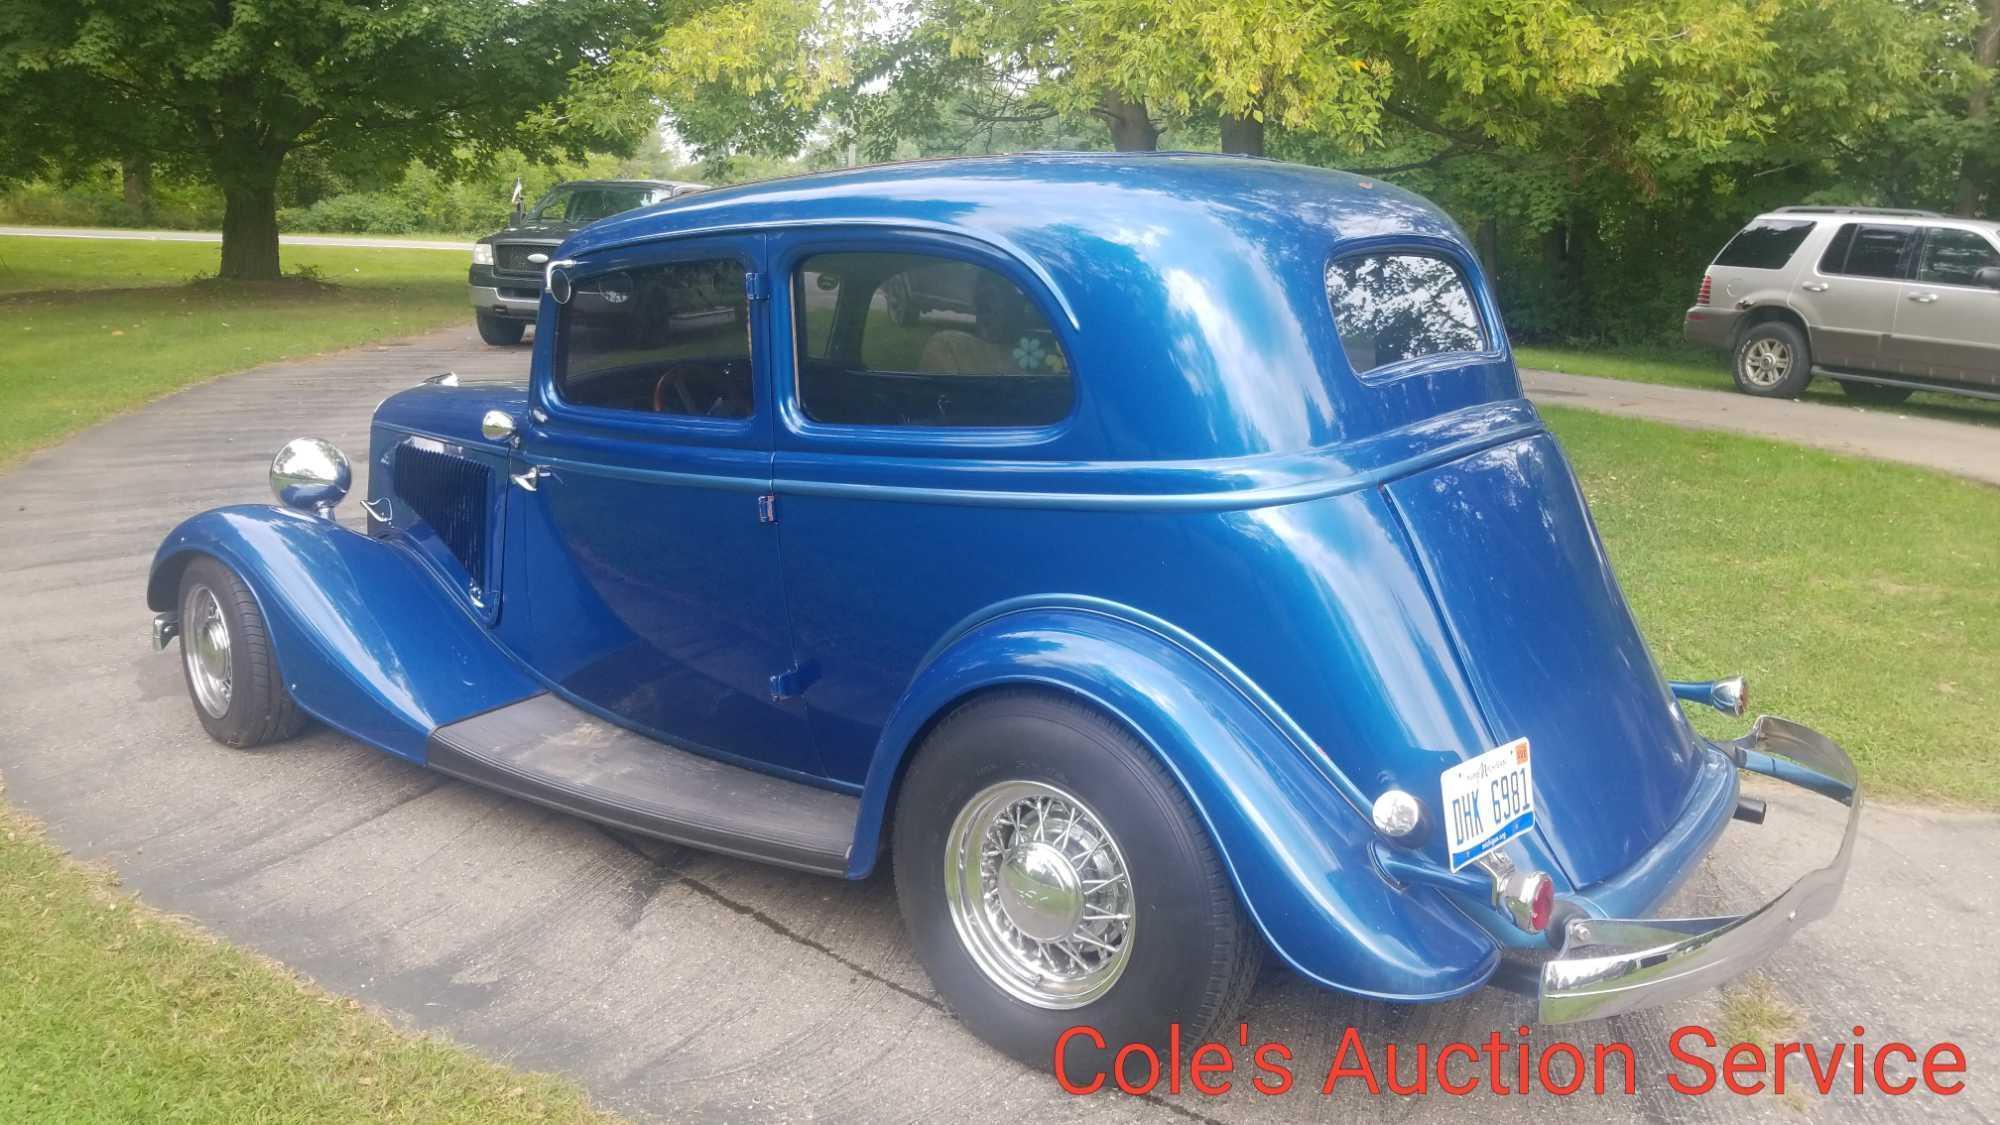 1934 Ford Victoria "Vicky" "Vic" in great condition. All steel body! Many features including custom